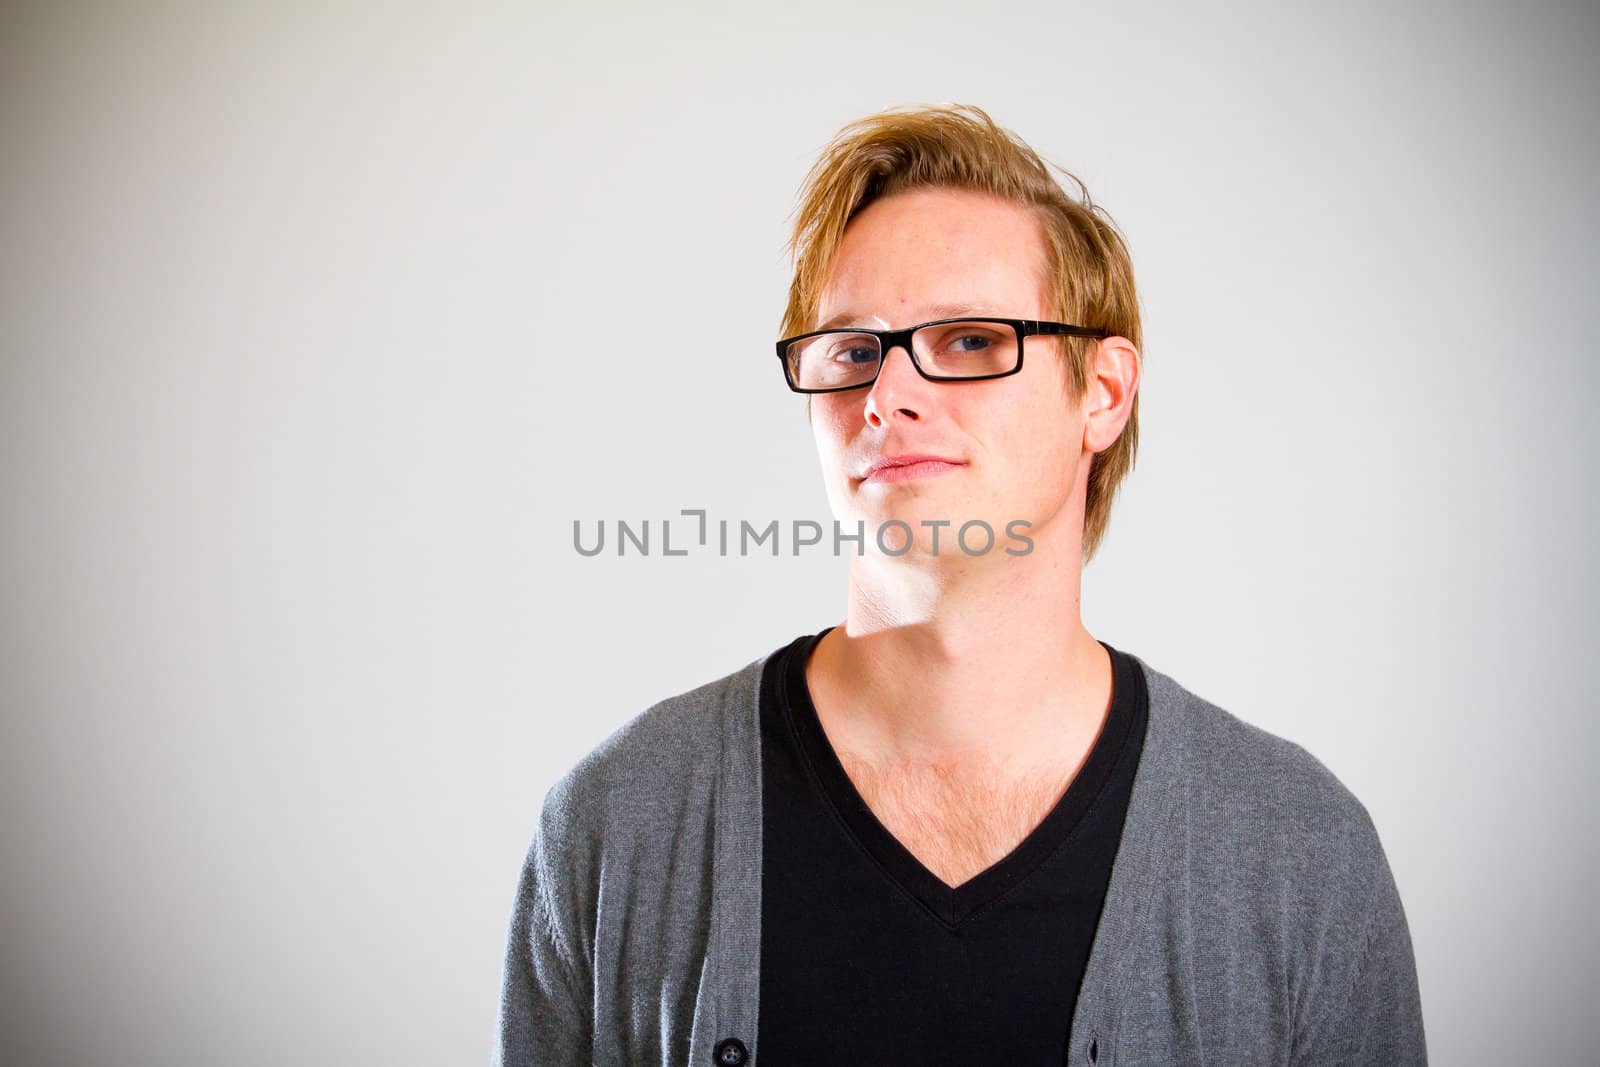 This contemporary style portrait of a man wearing a black shirt and a grey cardigan sweater while wearing glasses in the studio.